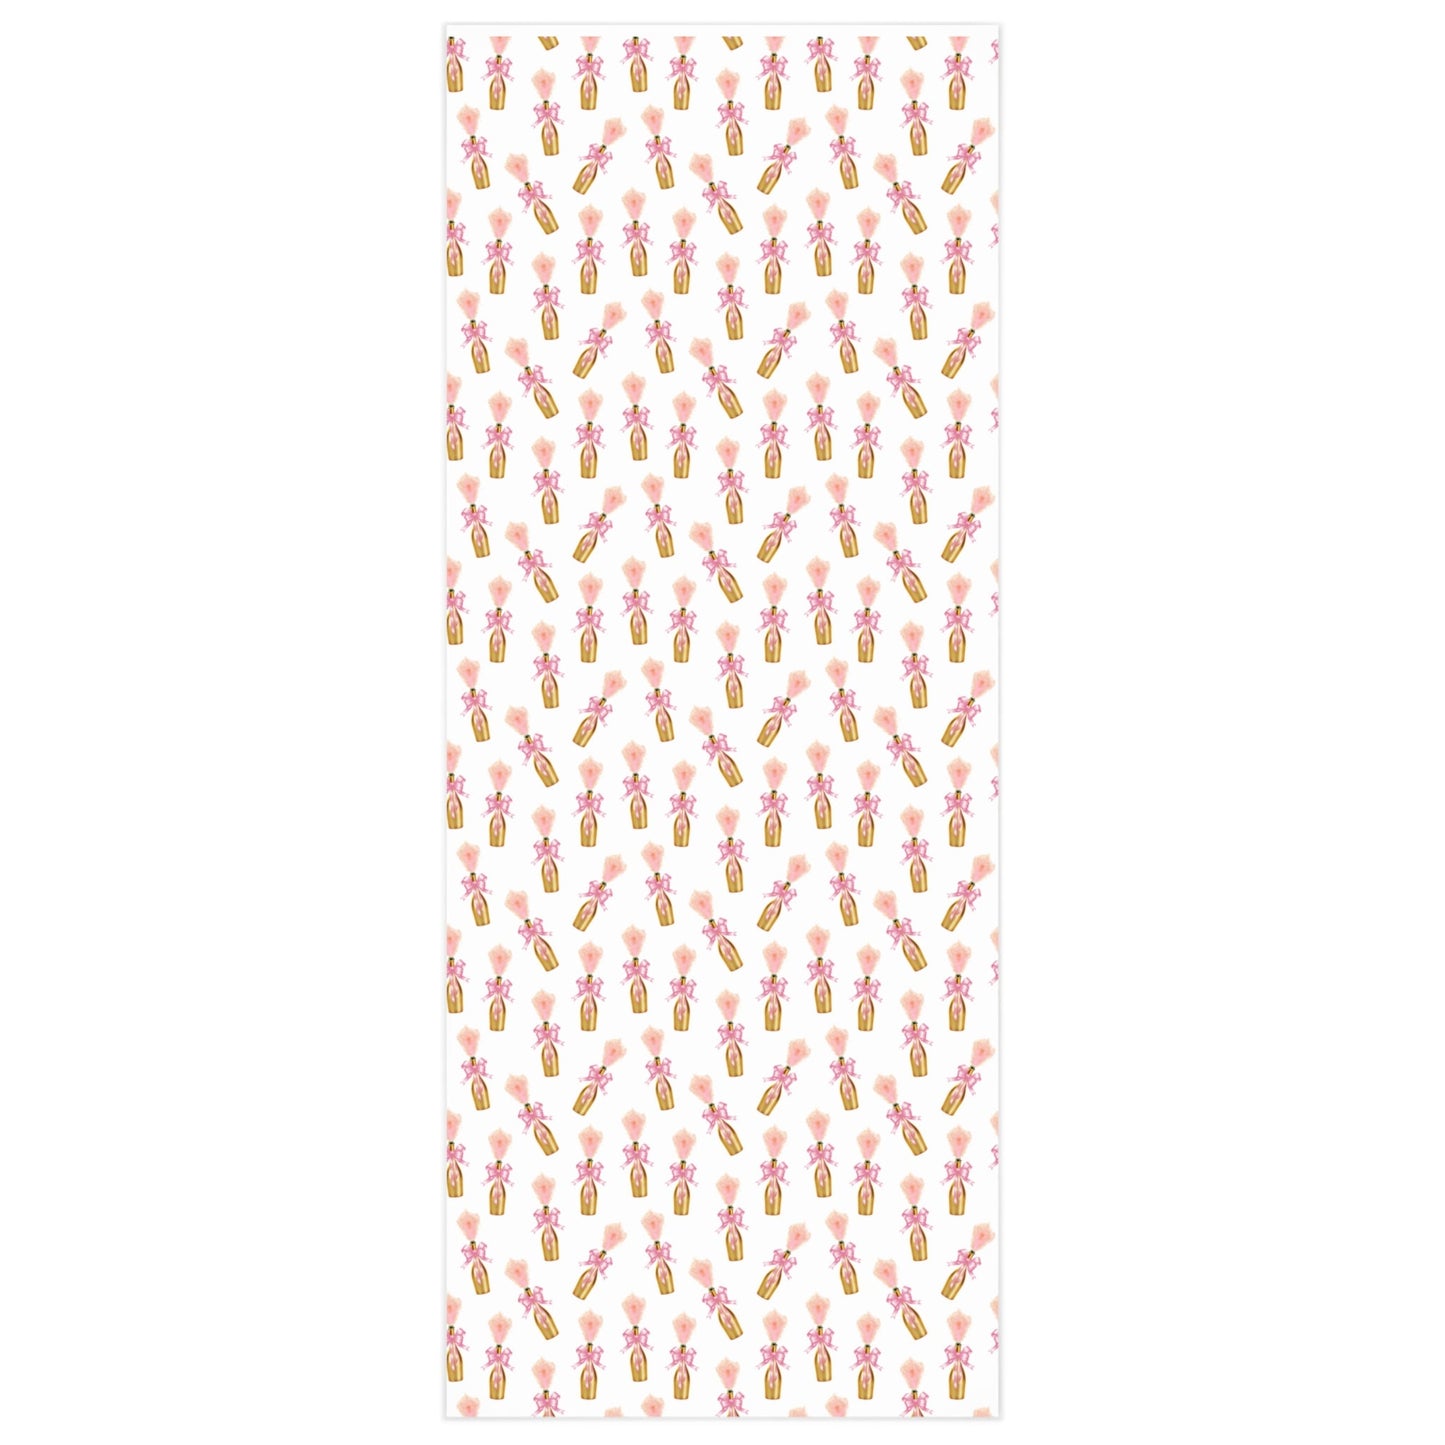 Bubbly Pink Champagne Gift Wrap Paper, Bridesmaid Gifts, Bachelorette Gift, 21 Birthday Gift Wrapping Paper, Anniversary Gift, Housewarming